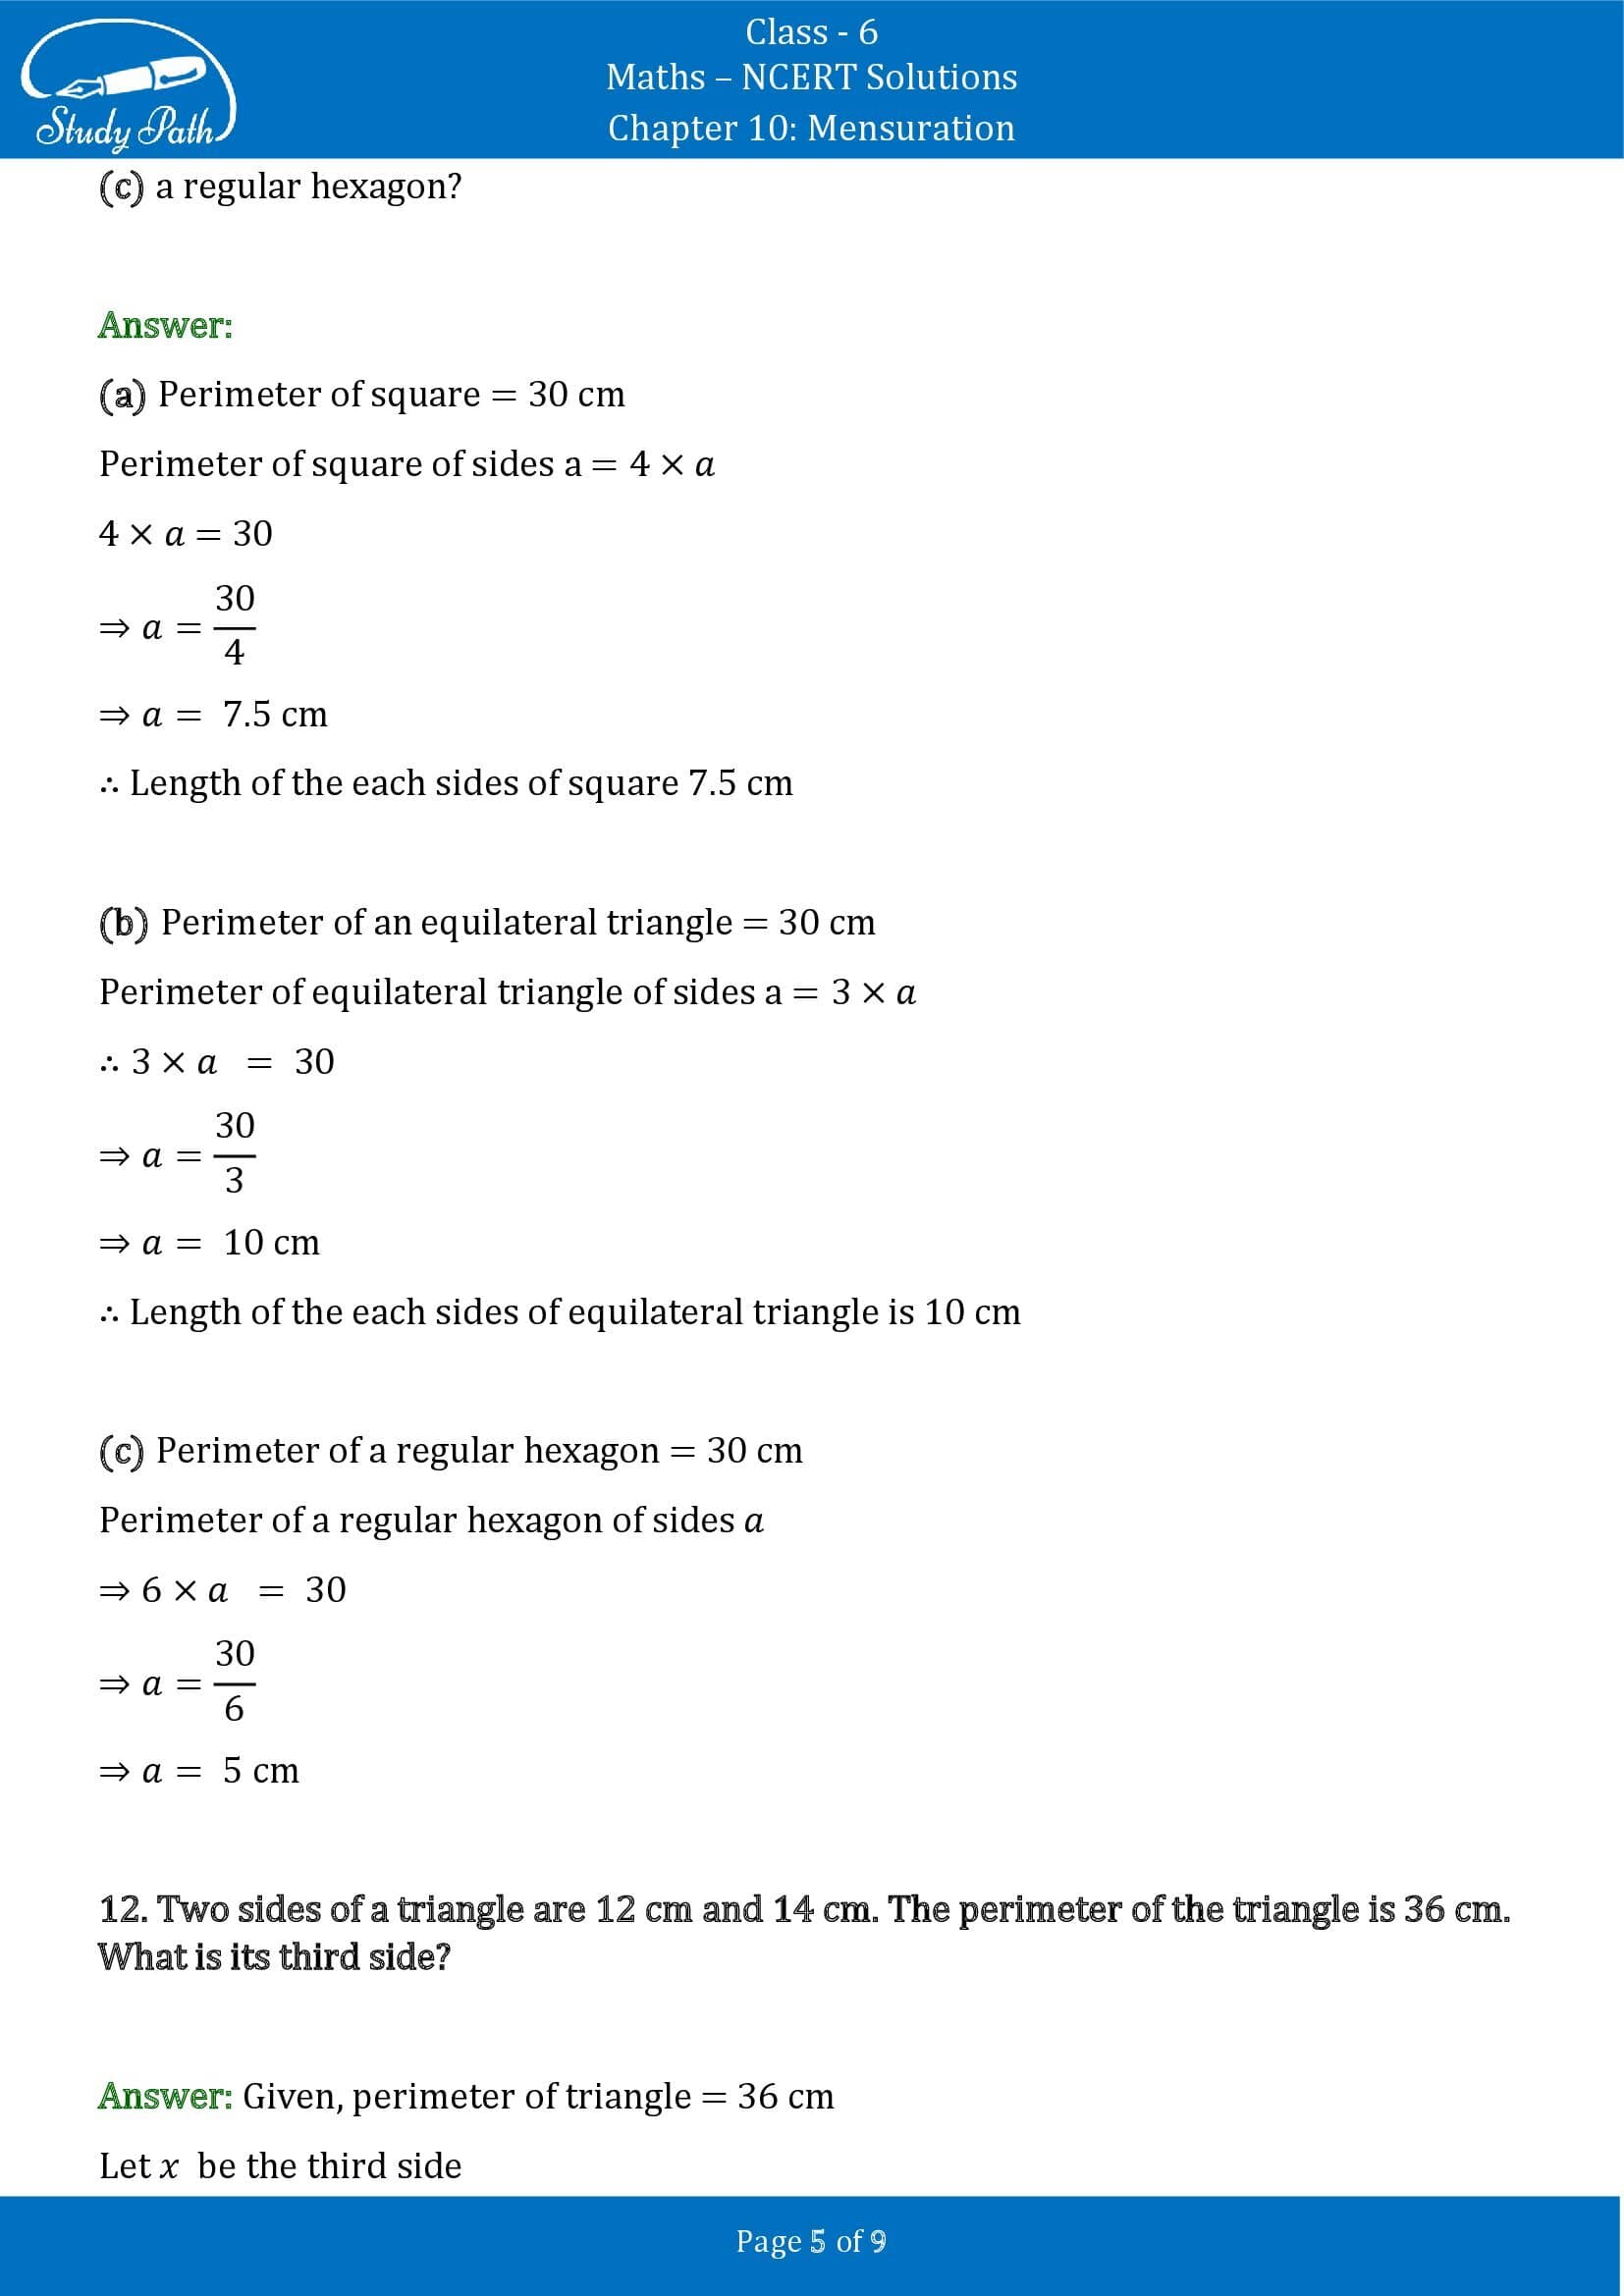 NCERT Solutions for Class 6 Maths Chapter 10 Mensuration Exercise 10.1 00005